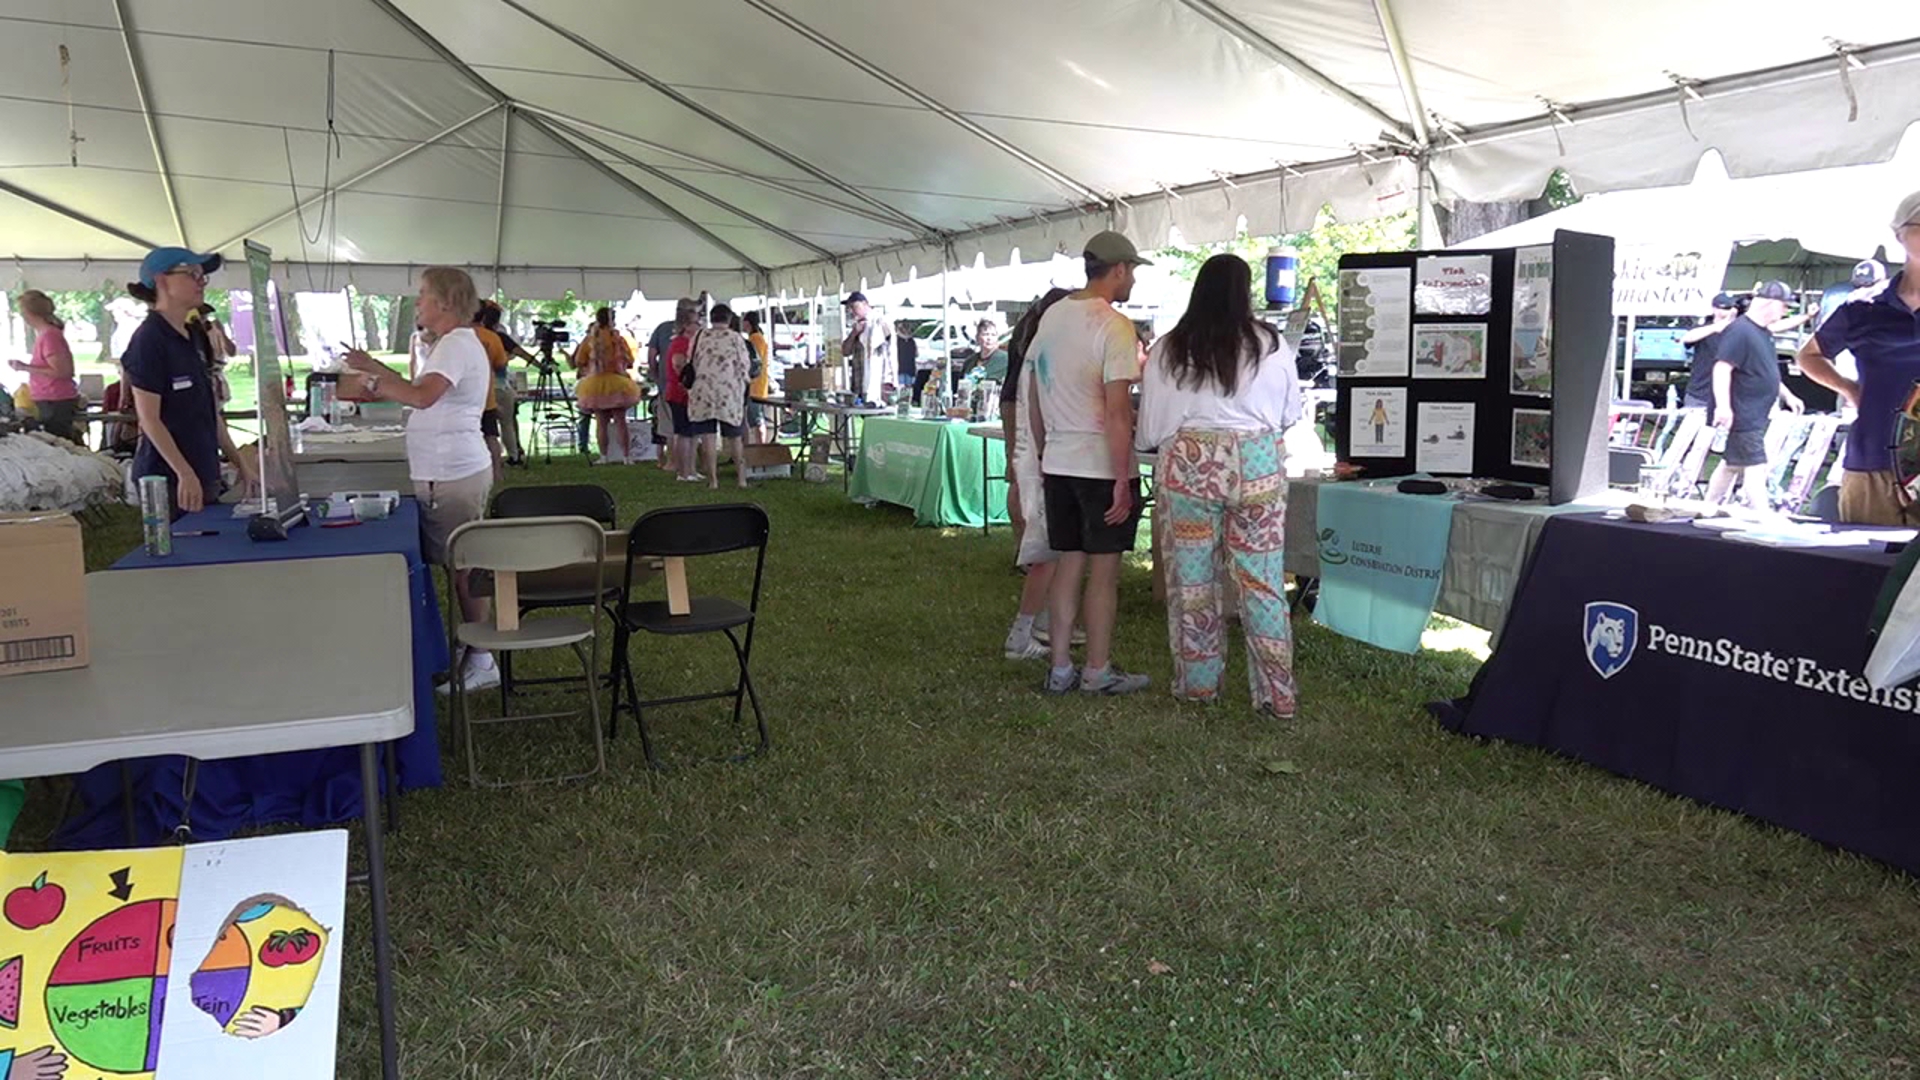 Saturday's heat didn't stop an annual festival from taking over Nesbitt Park in Luzerne County.